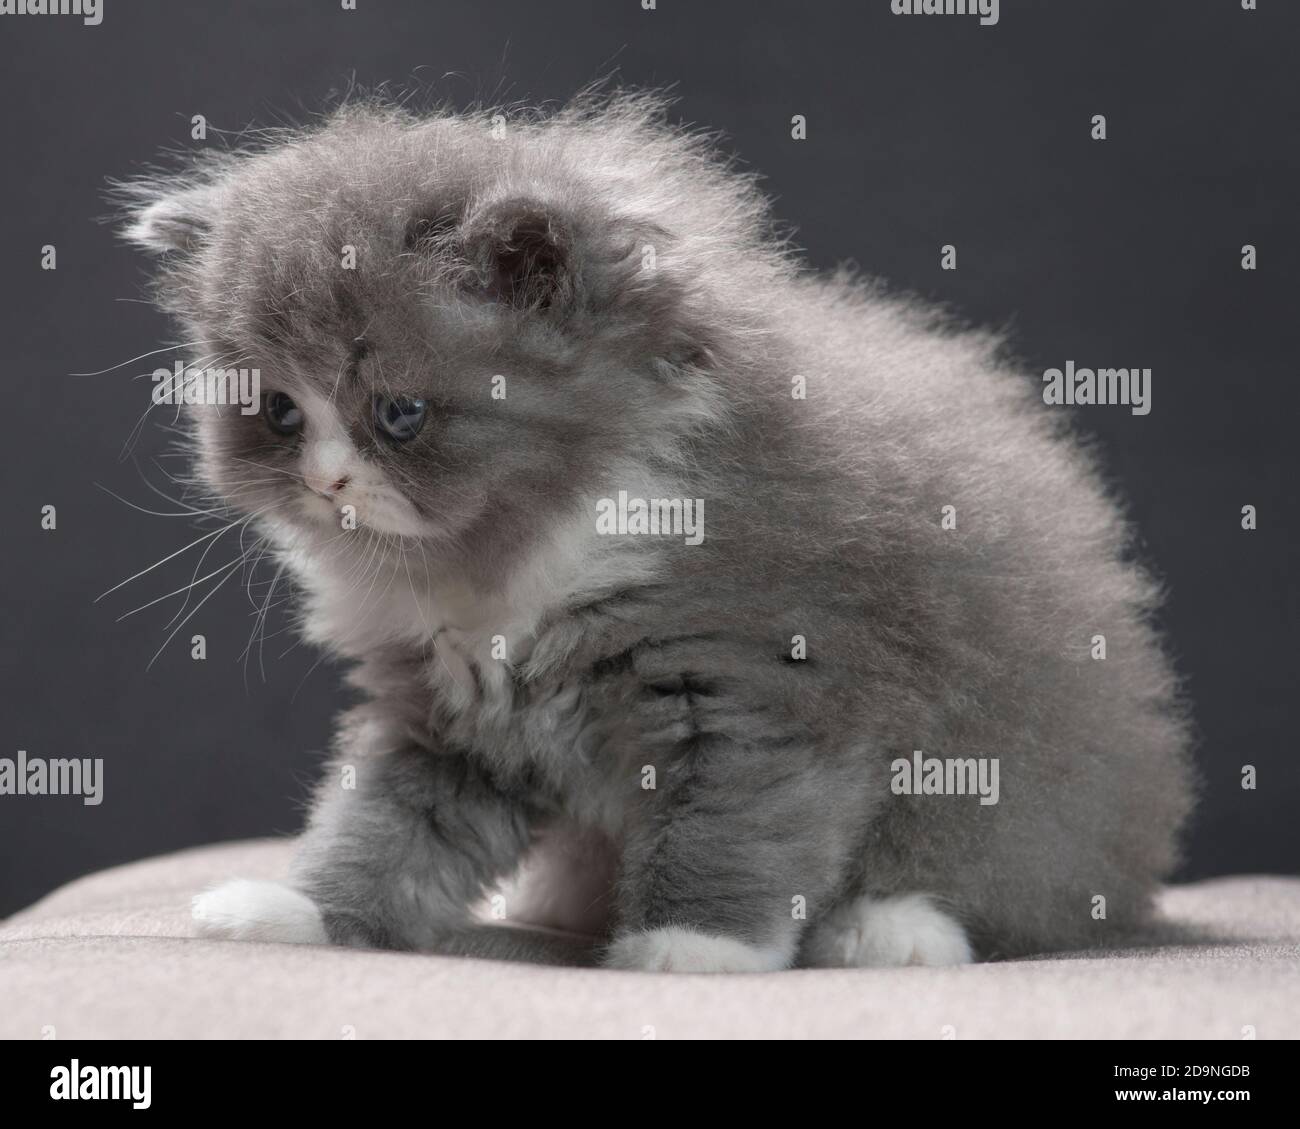 Cute photo of a shy grey and white ragamuffin kitten. Stock Photo